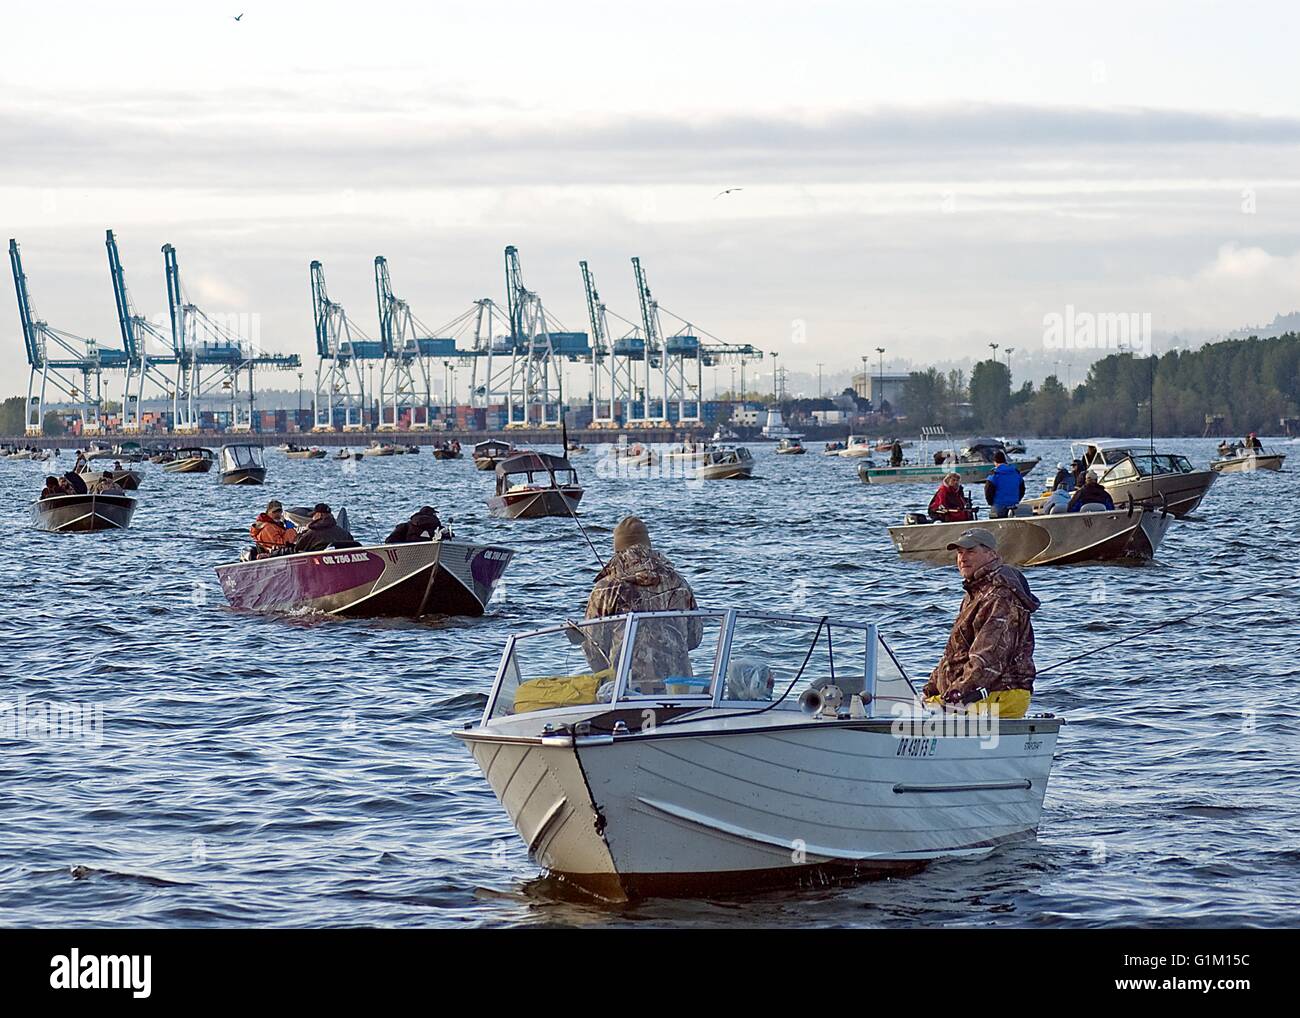 https://c8.alamy.com/comp/G1M15C/dozens-of-fishing-boats-spread-out-along-the-columbia-river-at-the-G1M15C.jpg